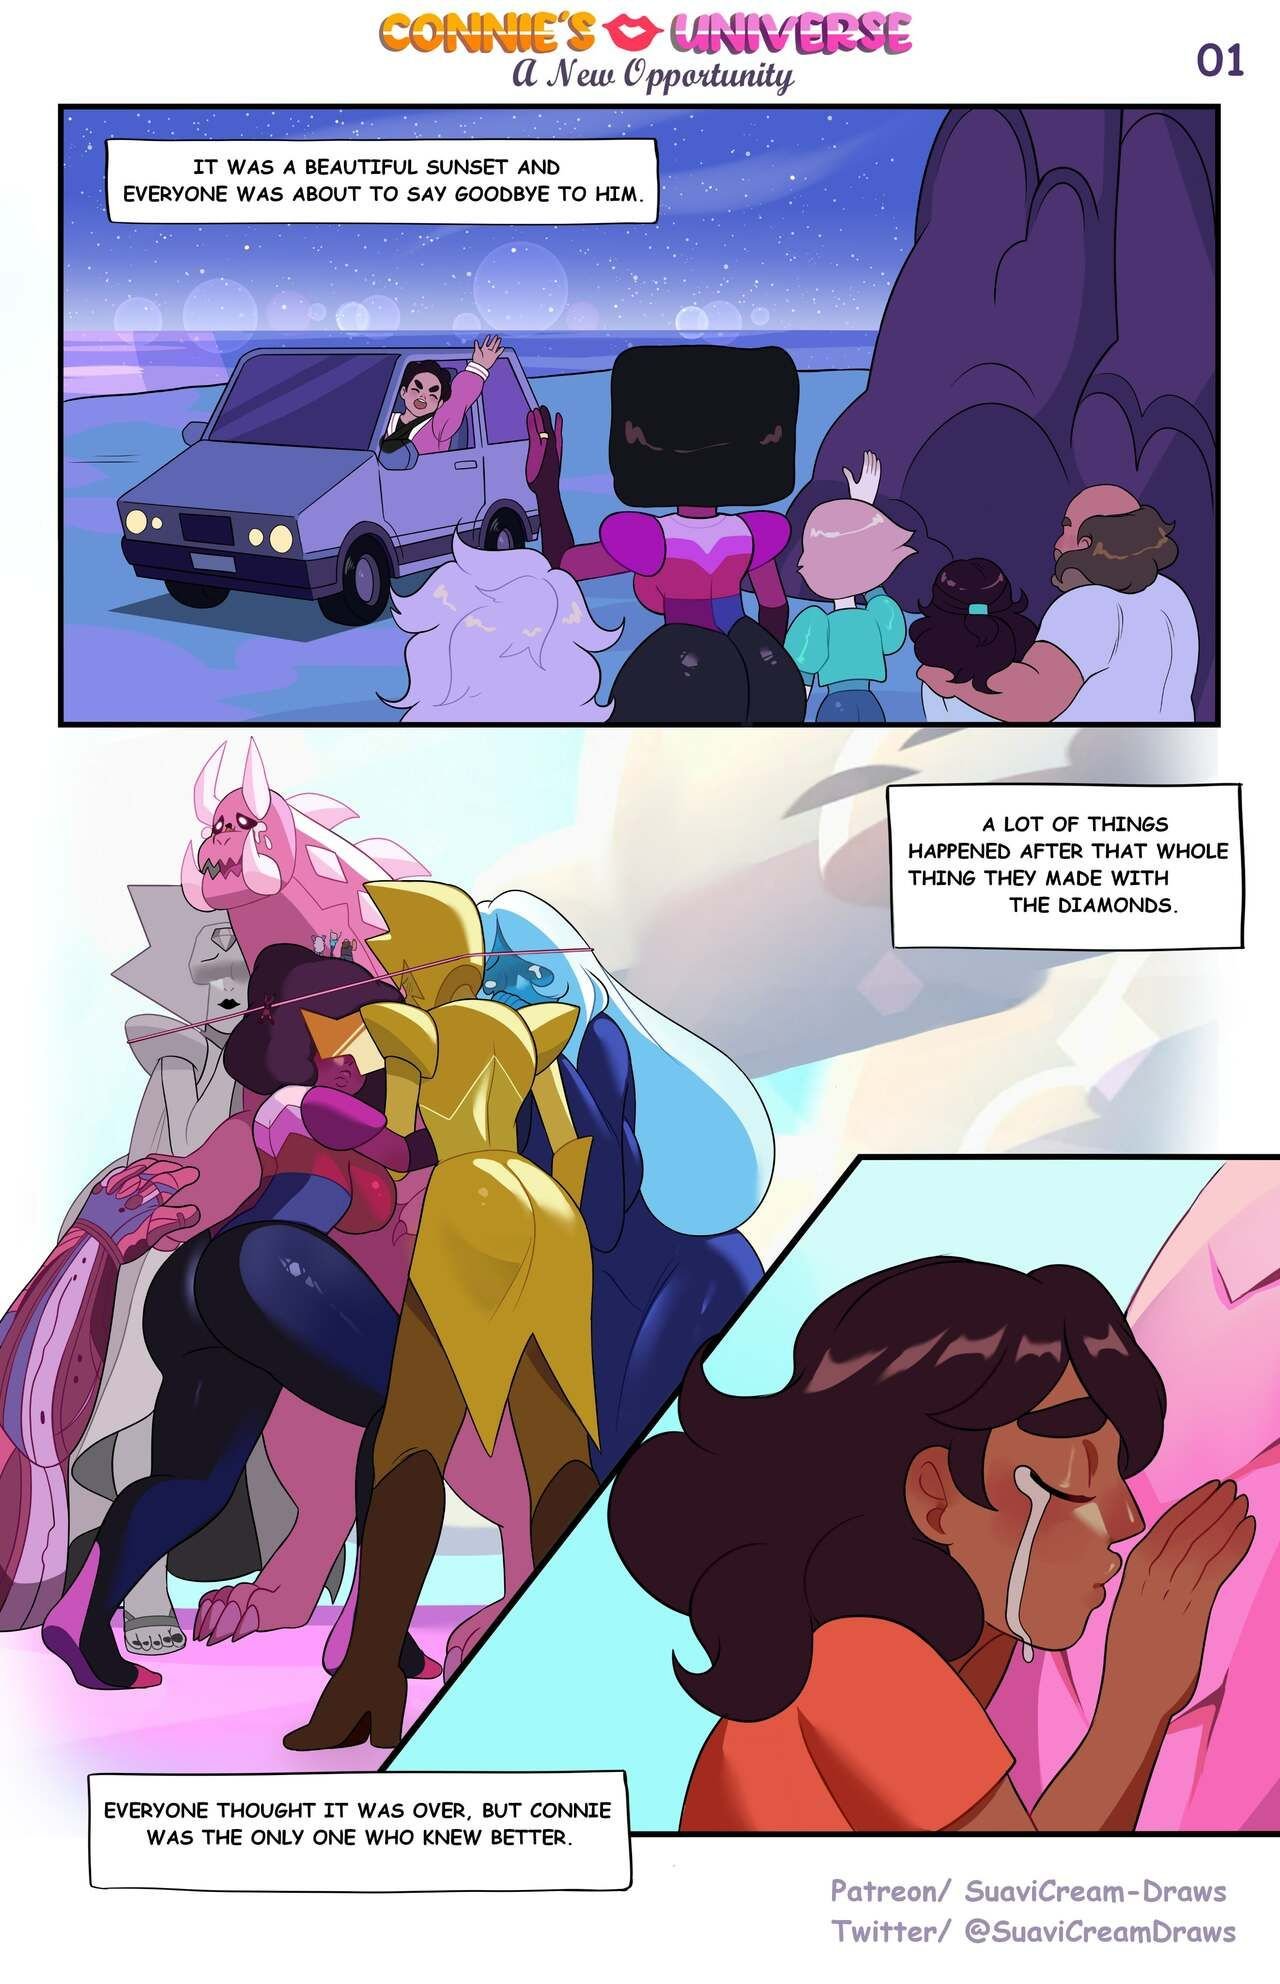 Connie’s universe: A new opportunity Hentai english 02